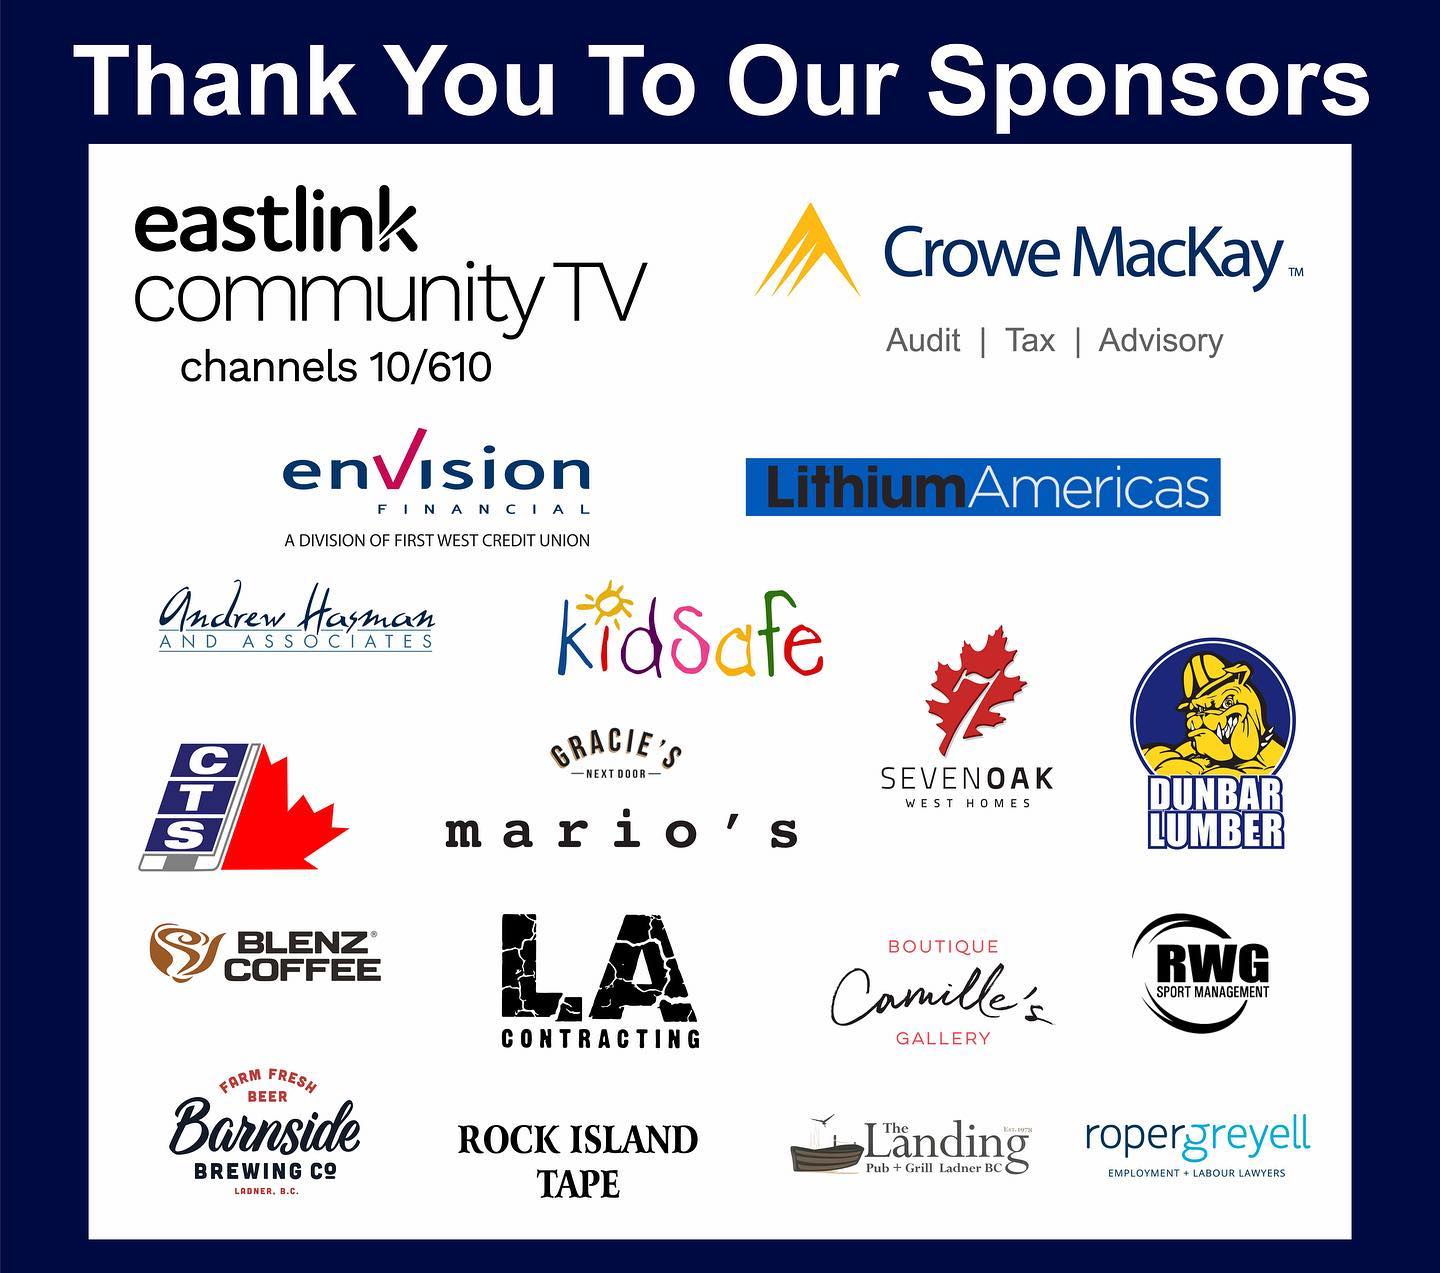 We’d like to send out a big thank you to our sponsors for #CTC2022! We appreciate your support very much! #DeltaHawkey